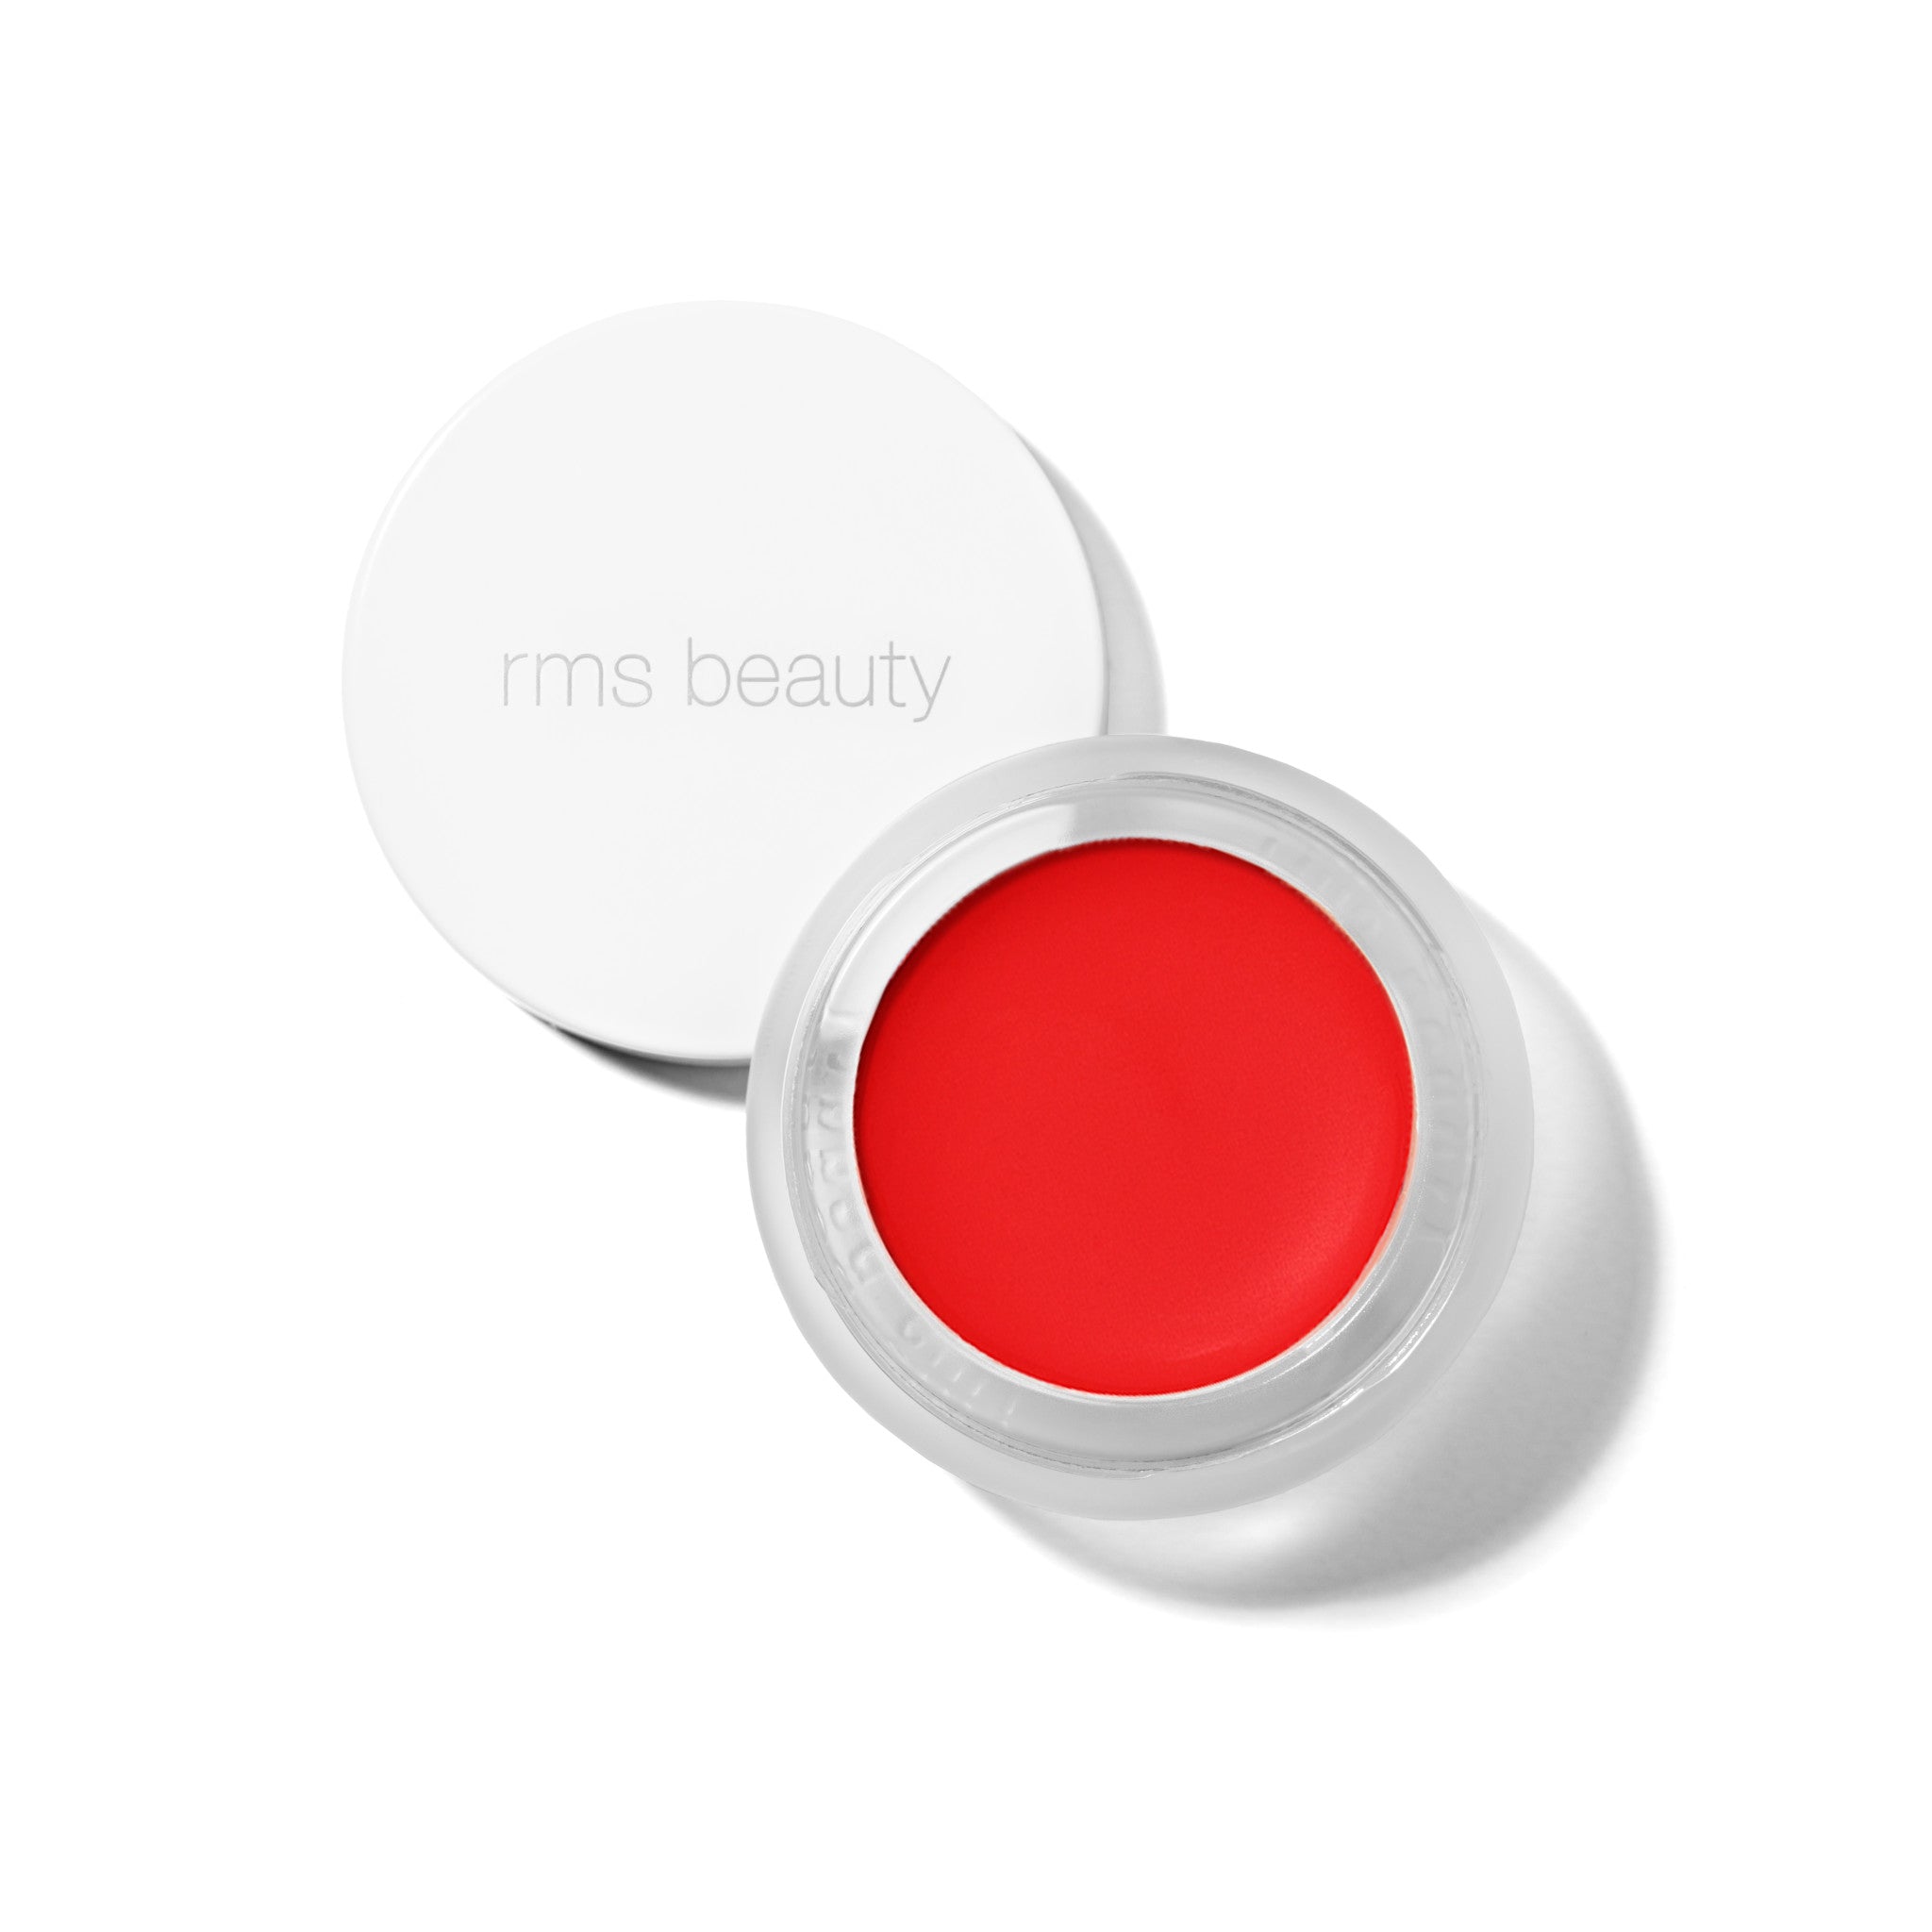 RMS Beauty Lip2Cheek Color/Shade variant: Beloved main image. This product is in the color red